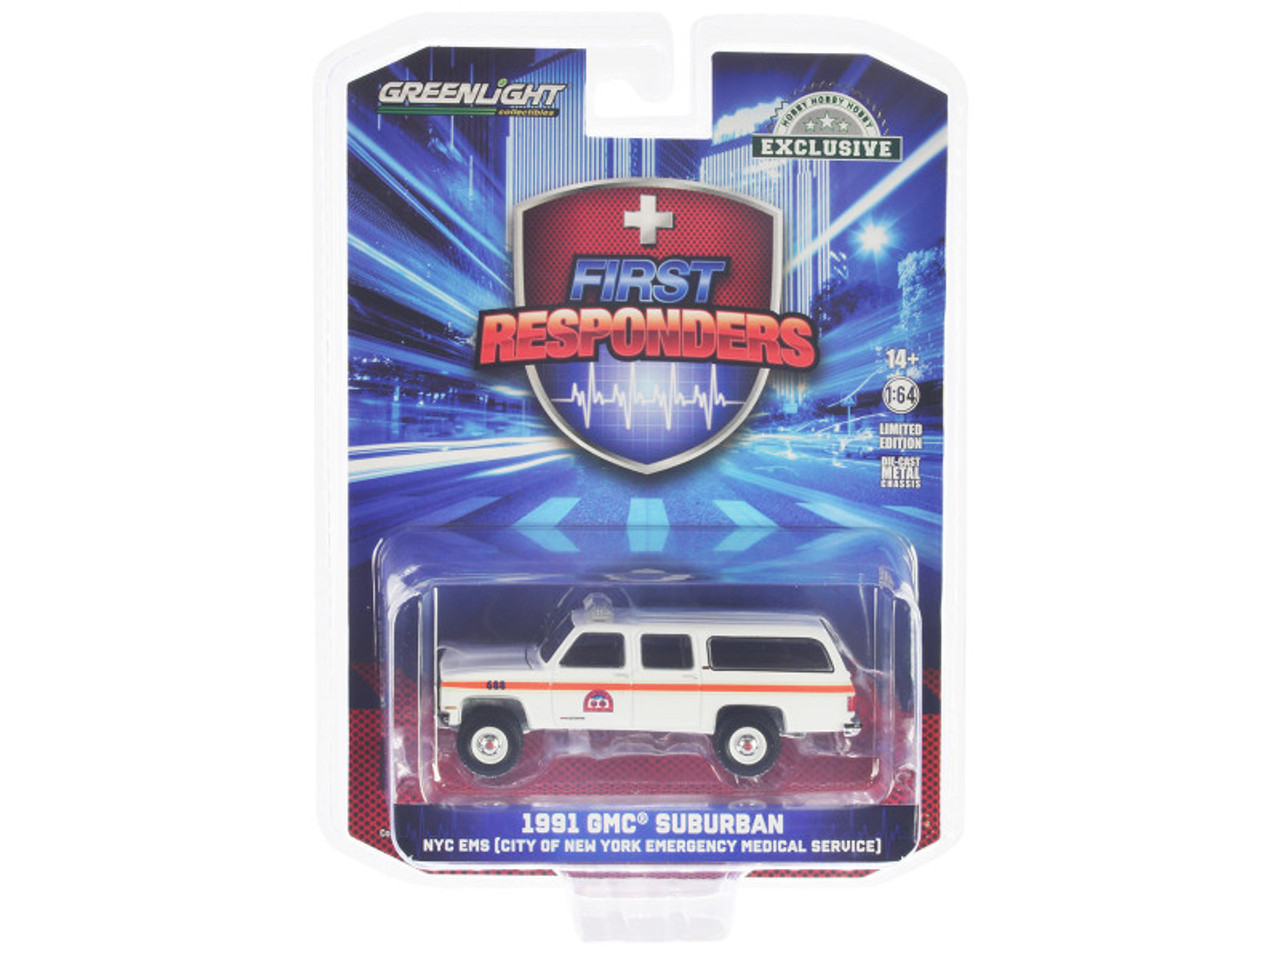 1991 GMC Suburban White with Orange Stripes "NYC EMS (City of New York Emergency Medical Service) - First Responders" "Hobby Exclusive" Series 1/64 Diecast Model Car by Greenlight